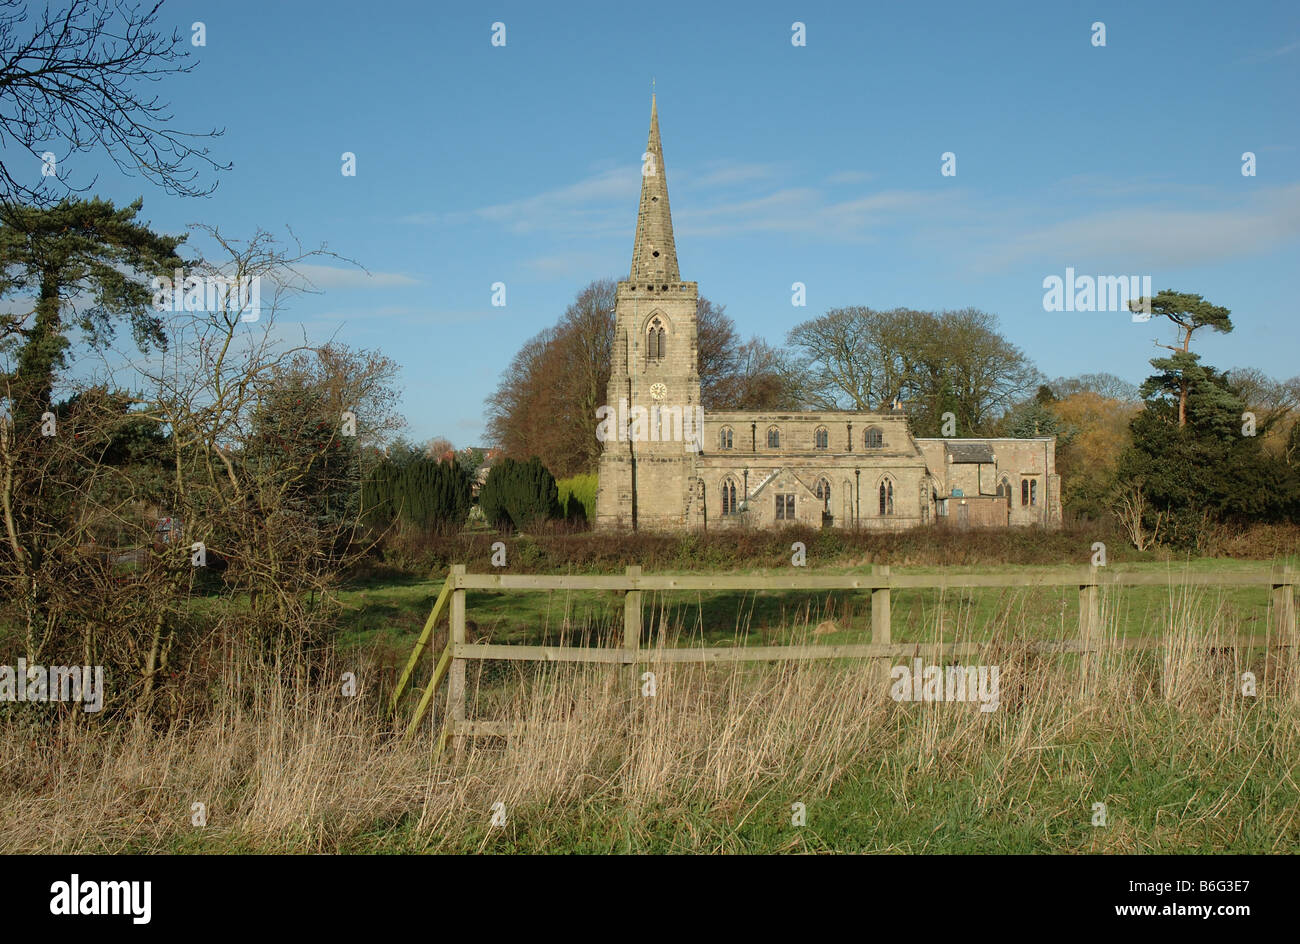 St Denys chiesa, Ibstock, Leicestershire, England, Regno Unito Foto Stock